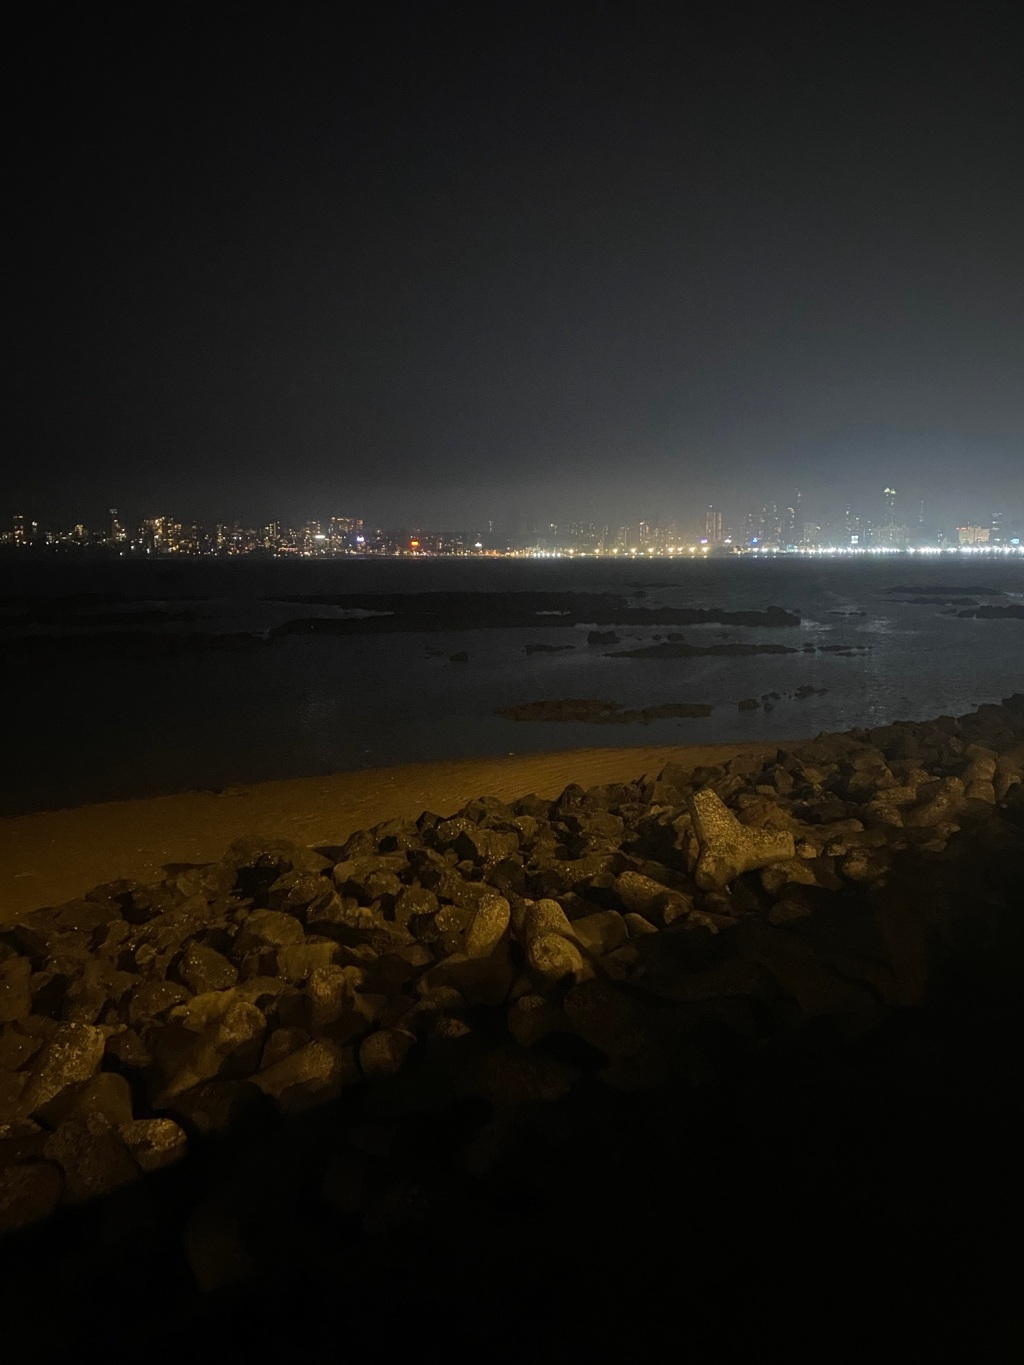 Image of night time skyline across the coast with city lights on the horizon